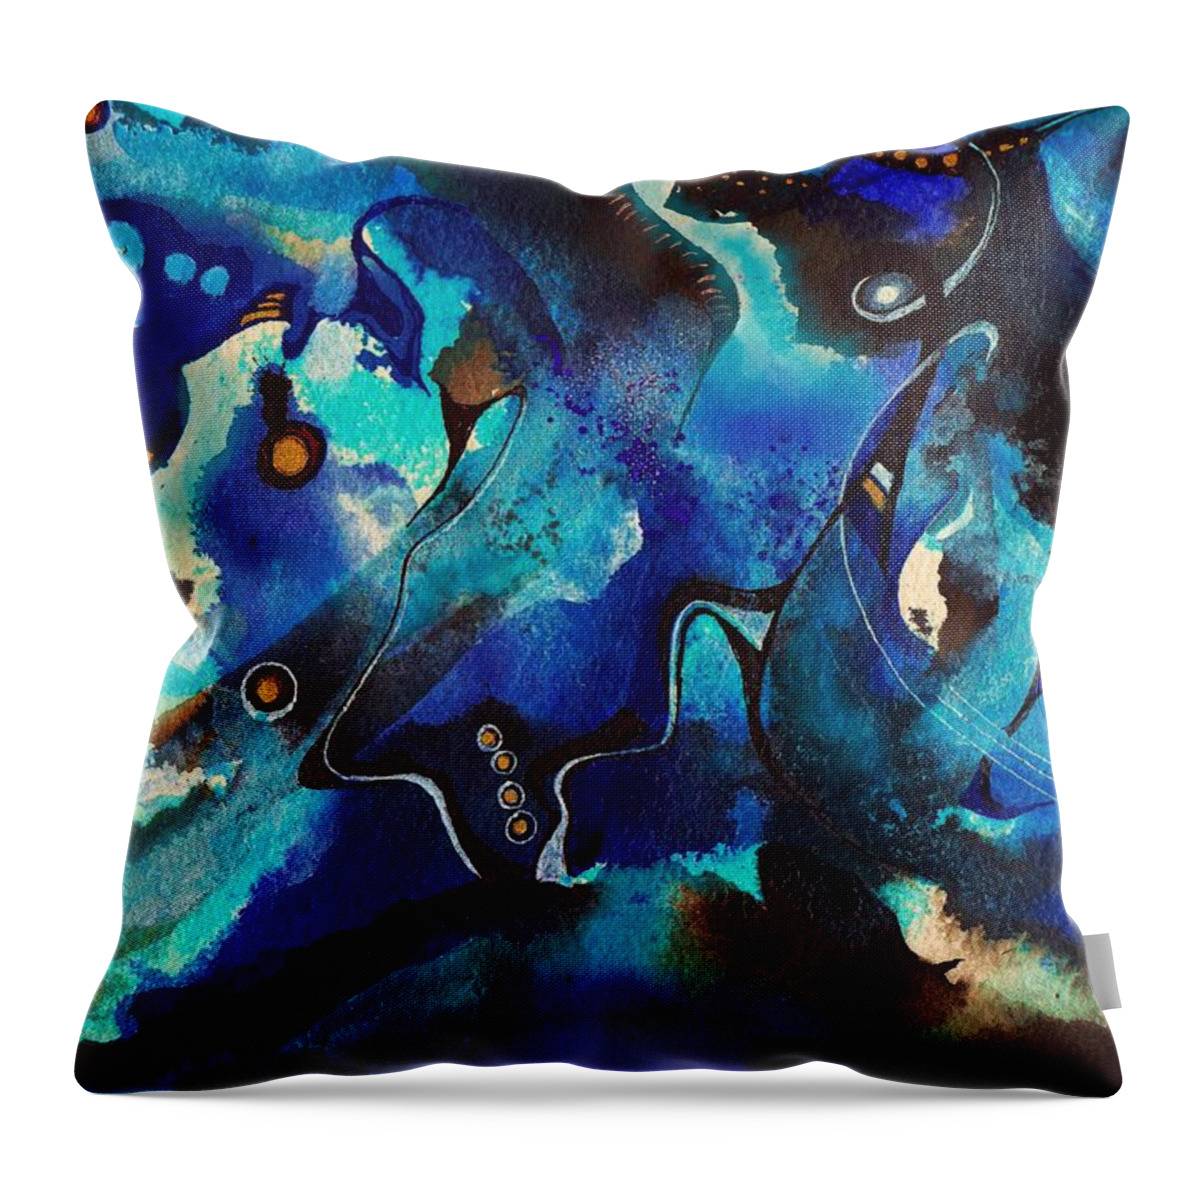 Abstract Painting Throw Pillow featuring the painting Blue Scenery by Wolfgang Schweizer